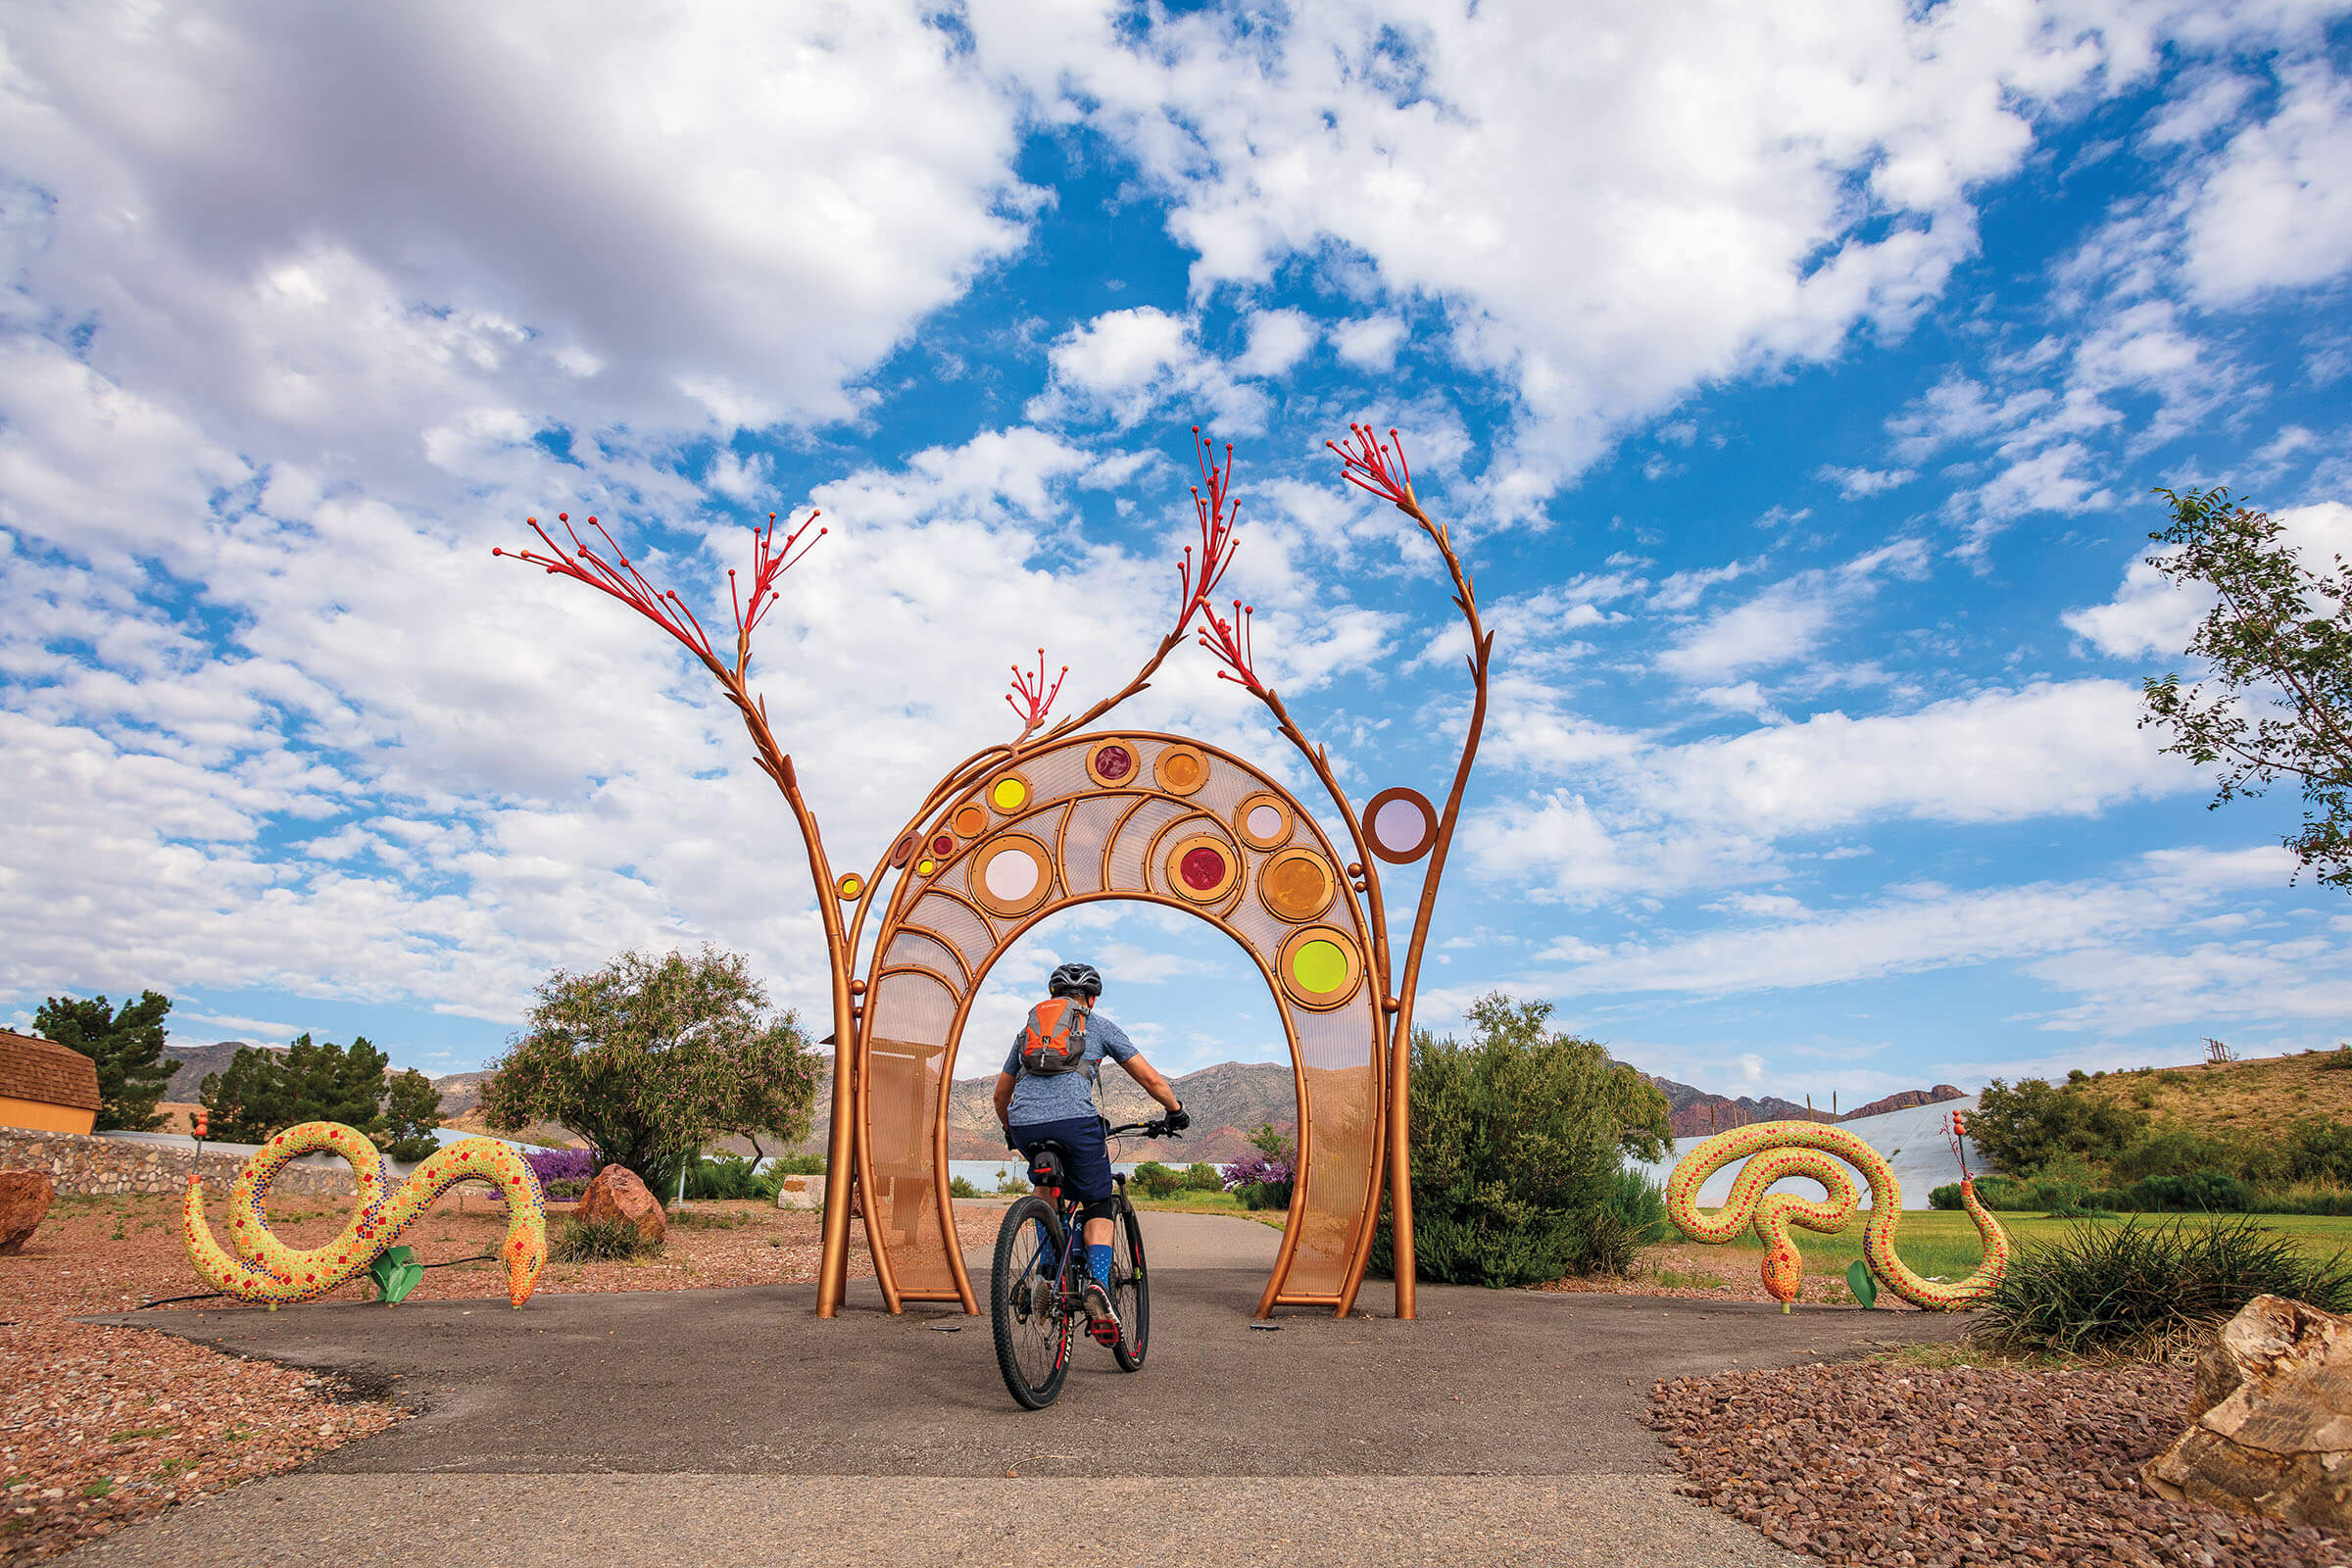 Brightly colored sculptures in red and gold making a snake and archway under blue sky. A cyclist pedals through the archway